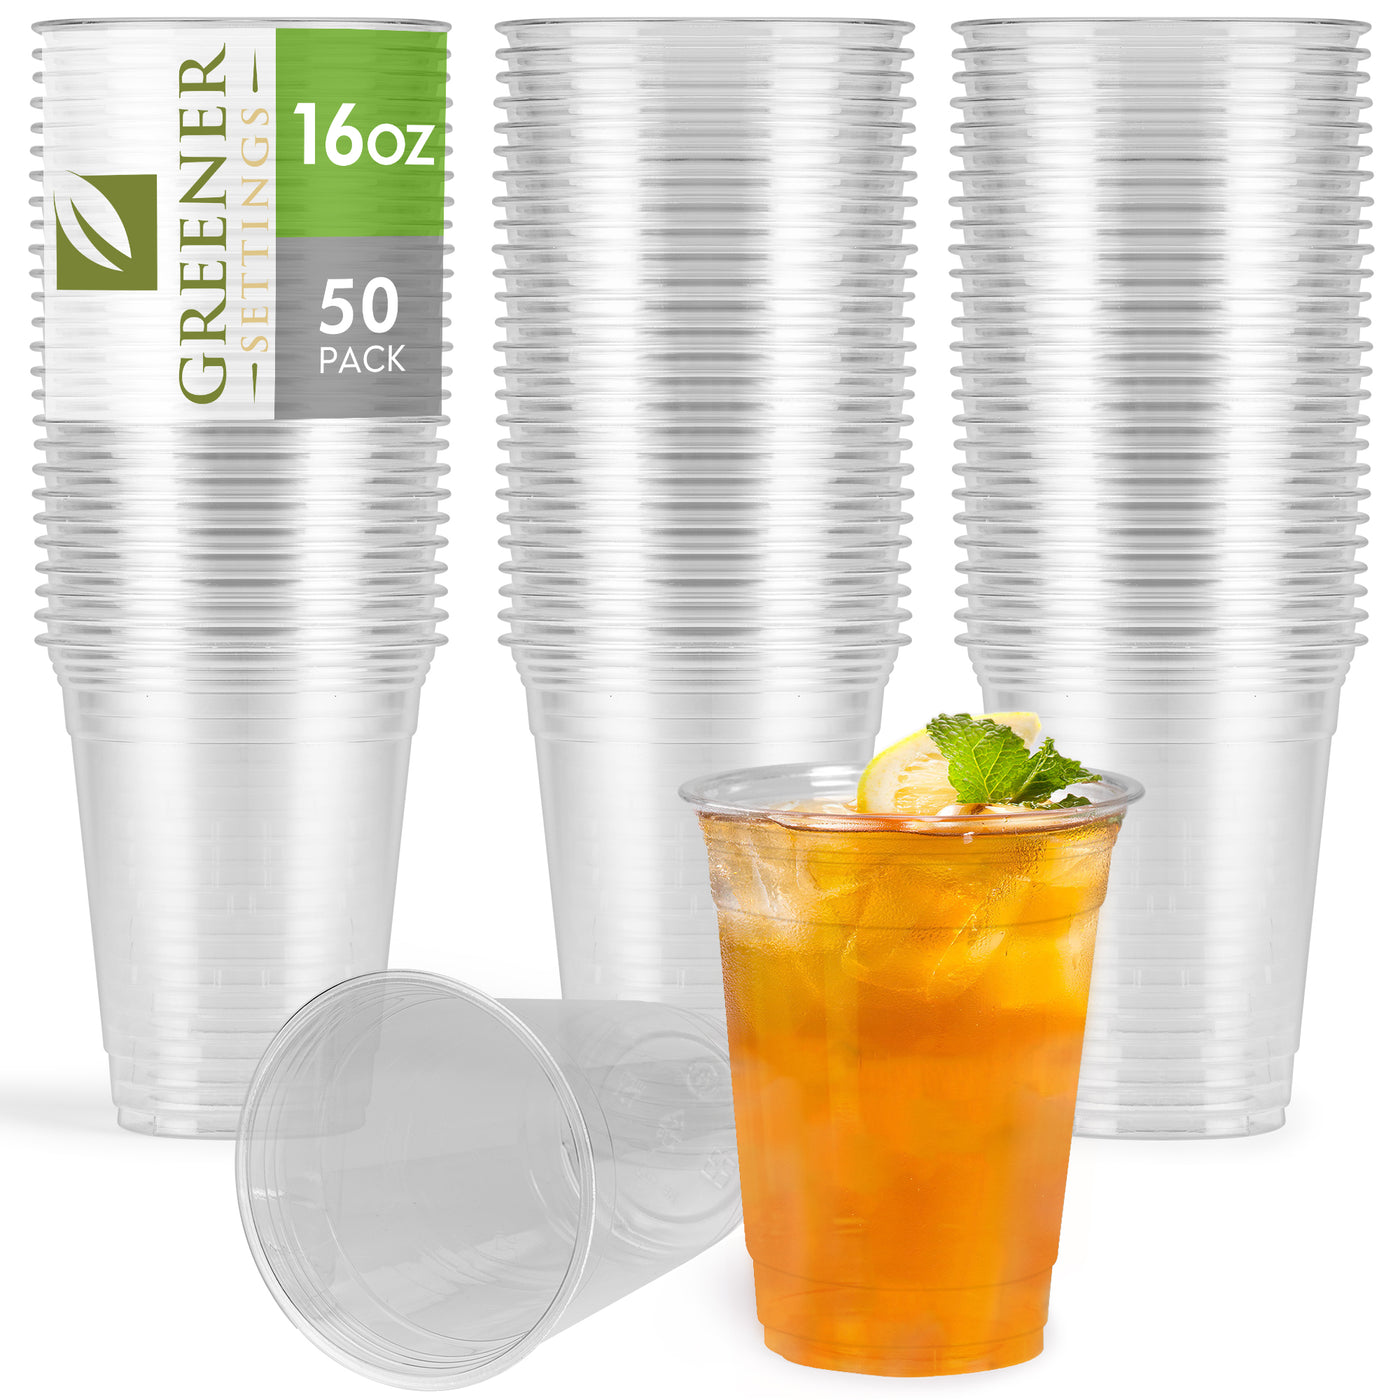 16 oz. Clear Compostable Disposable Cups, Cold Drink Cups [50-Pack] - Perfect Settings Tableware